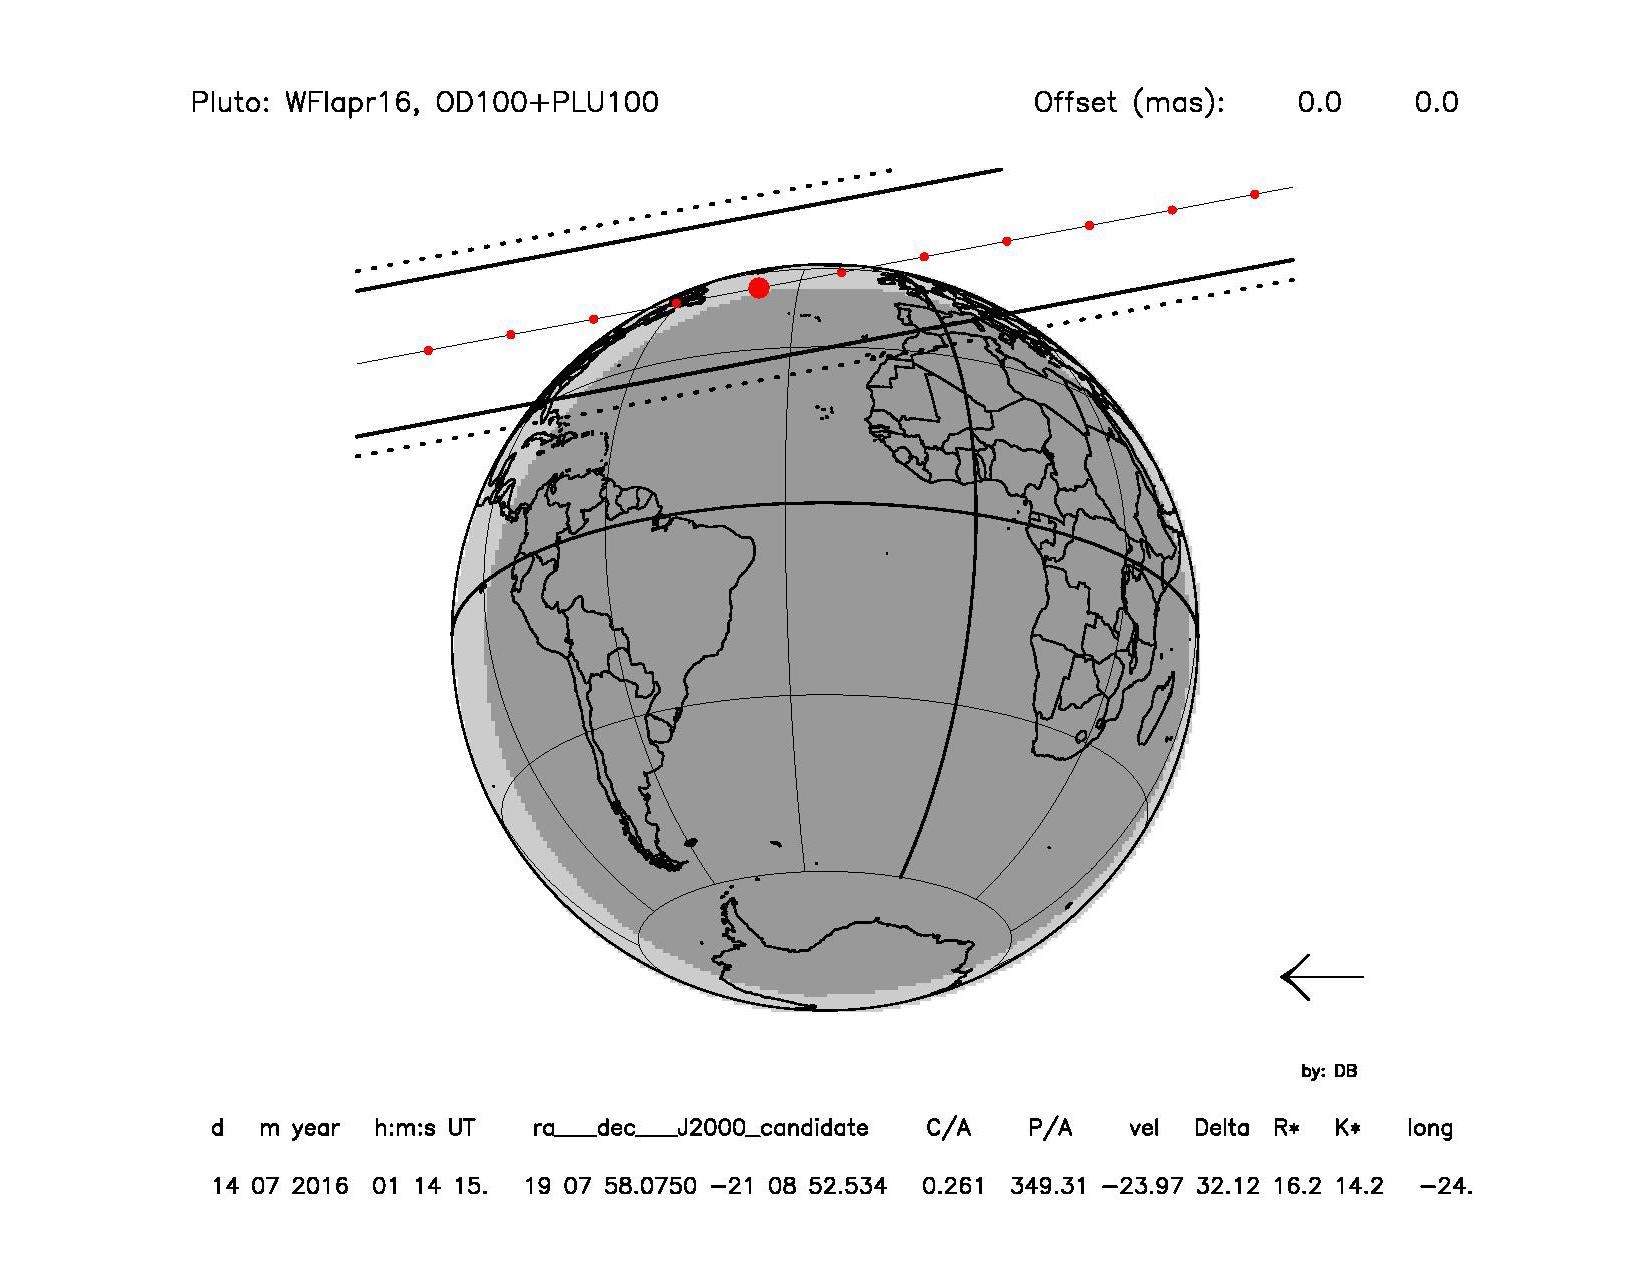 Pluto occultation on 14th of July